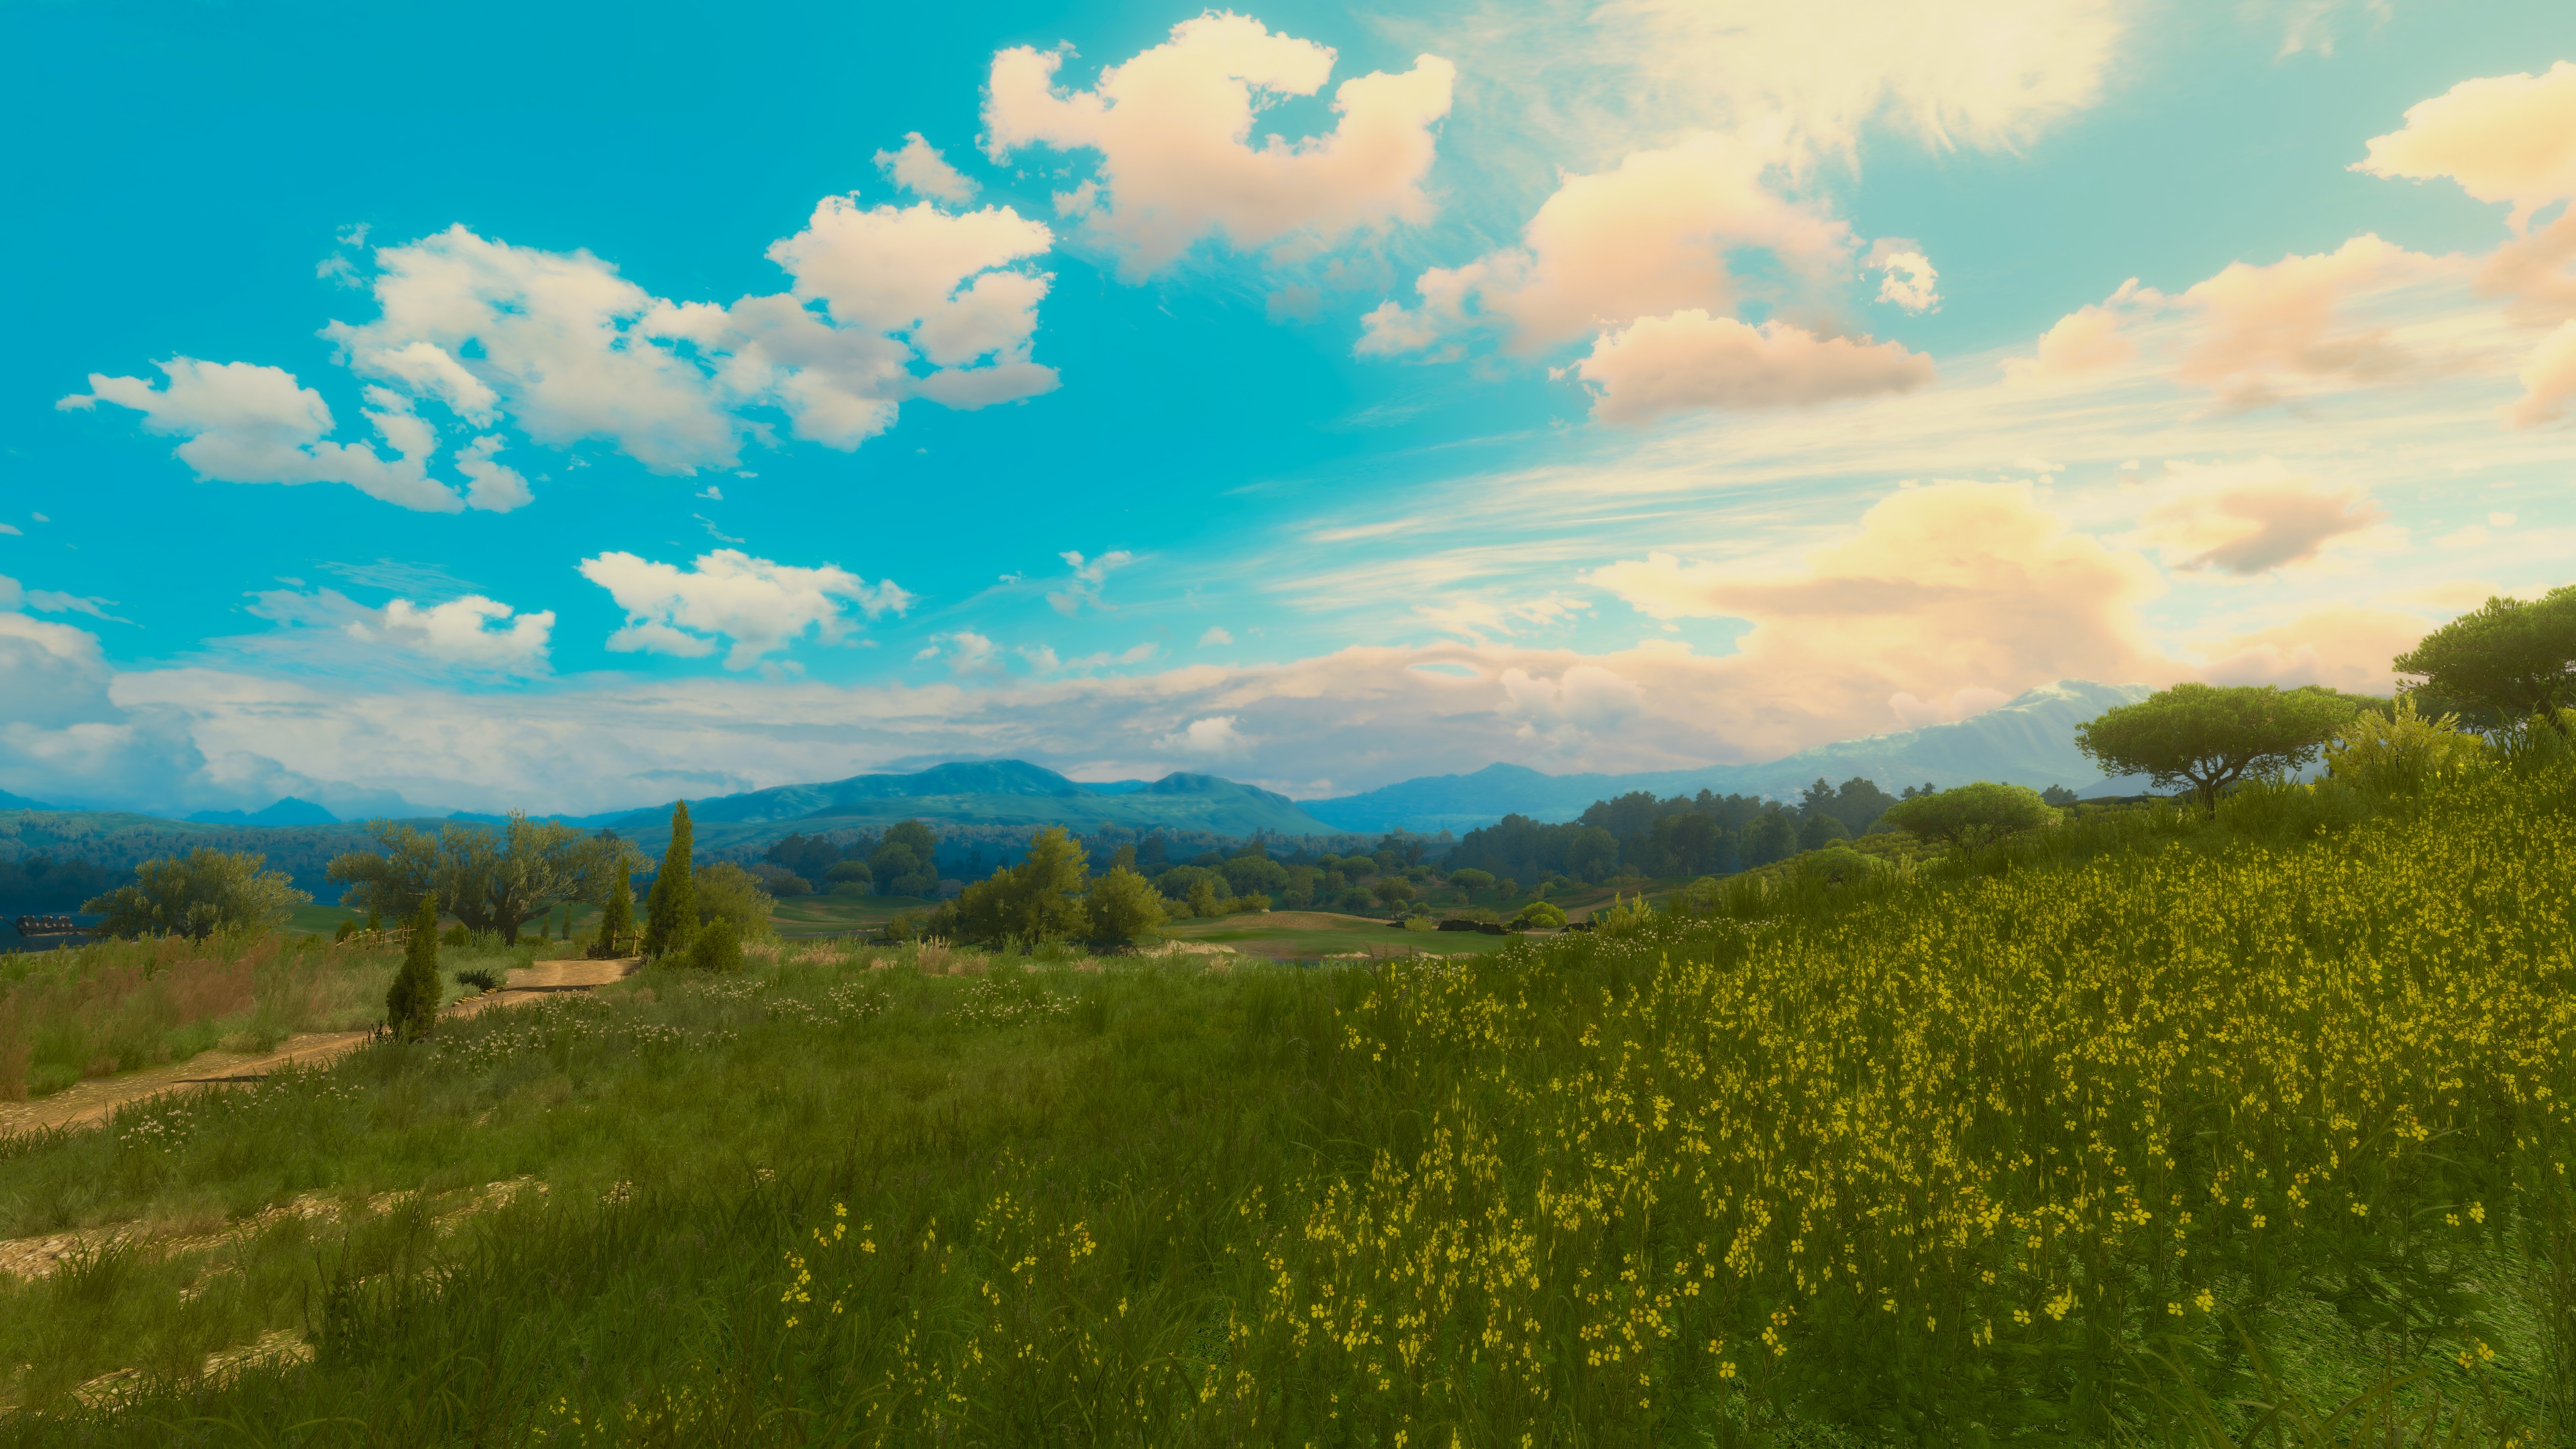 General 3840x2160 tussent landscape sunlight sky trees clouds nature forest flowers video games PC gaming video game art screen shot The Witcher 3: Wild Hunt CGI digital art